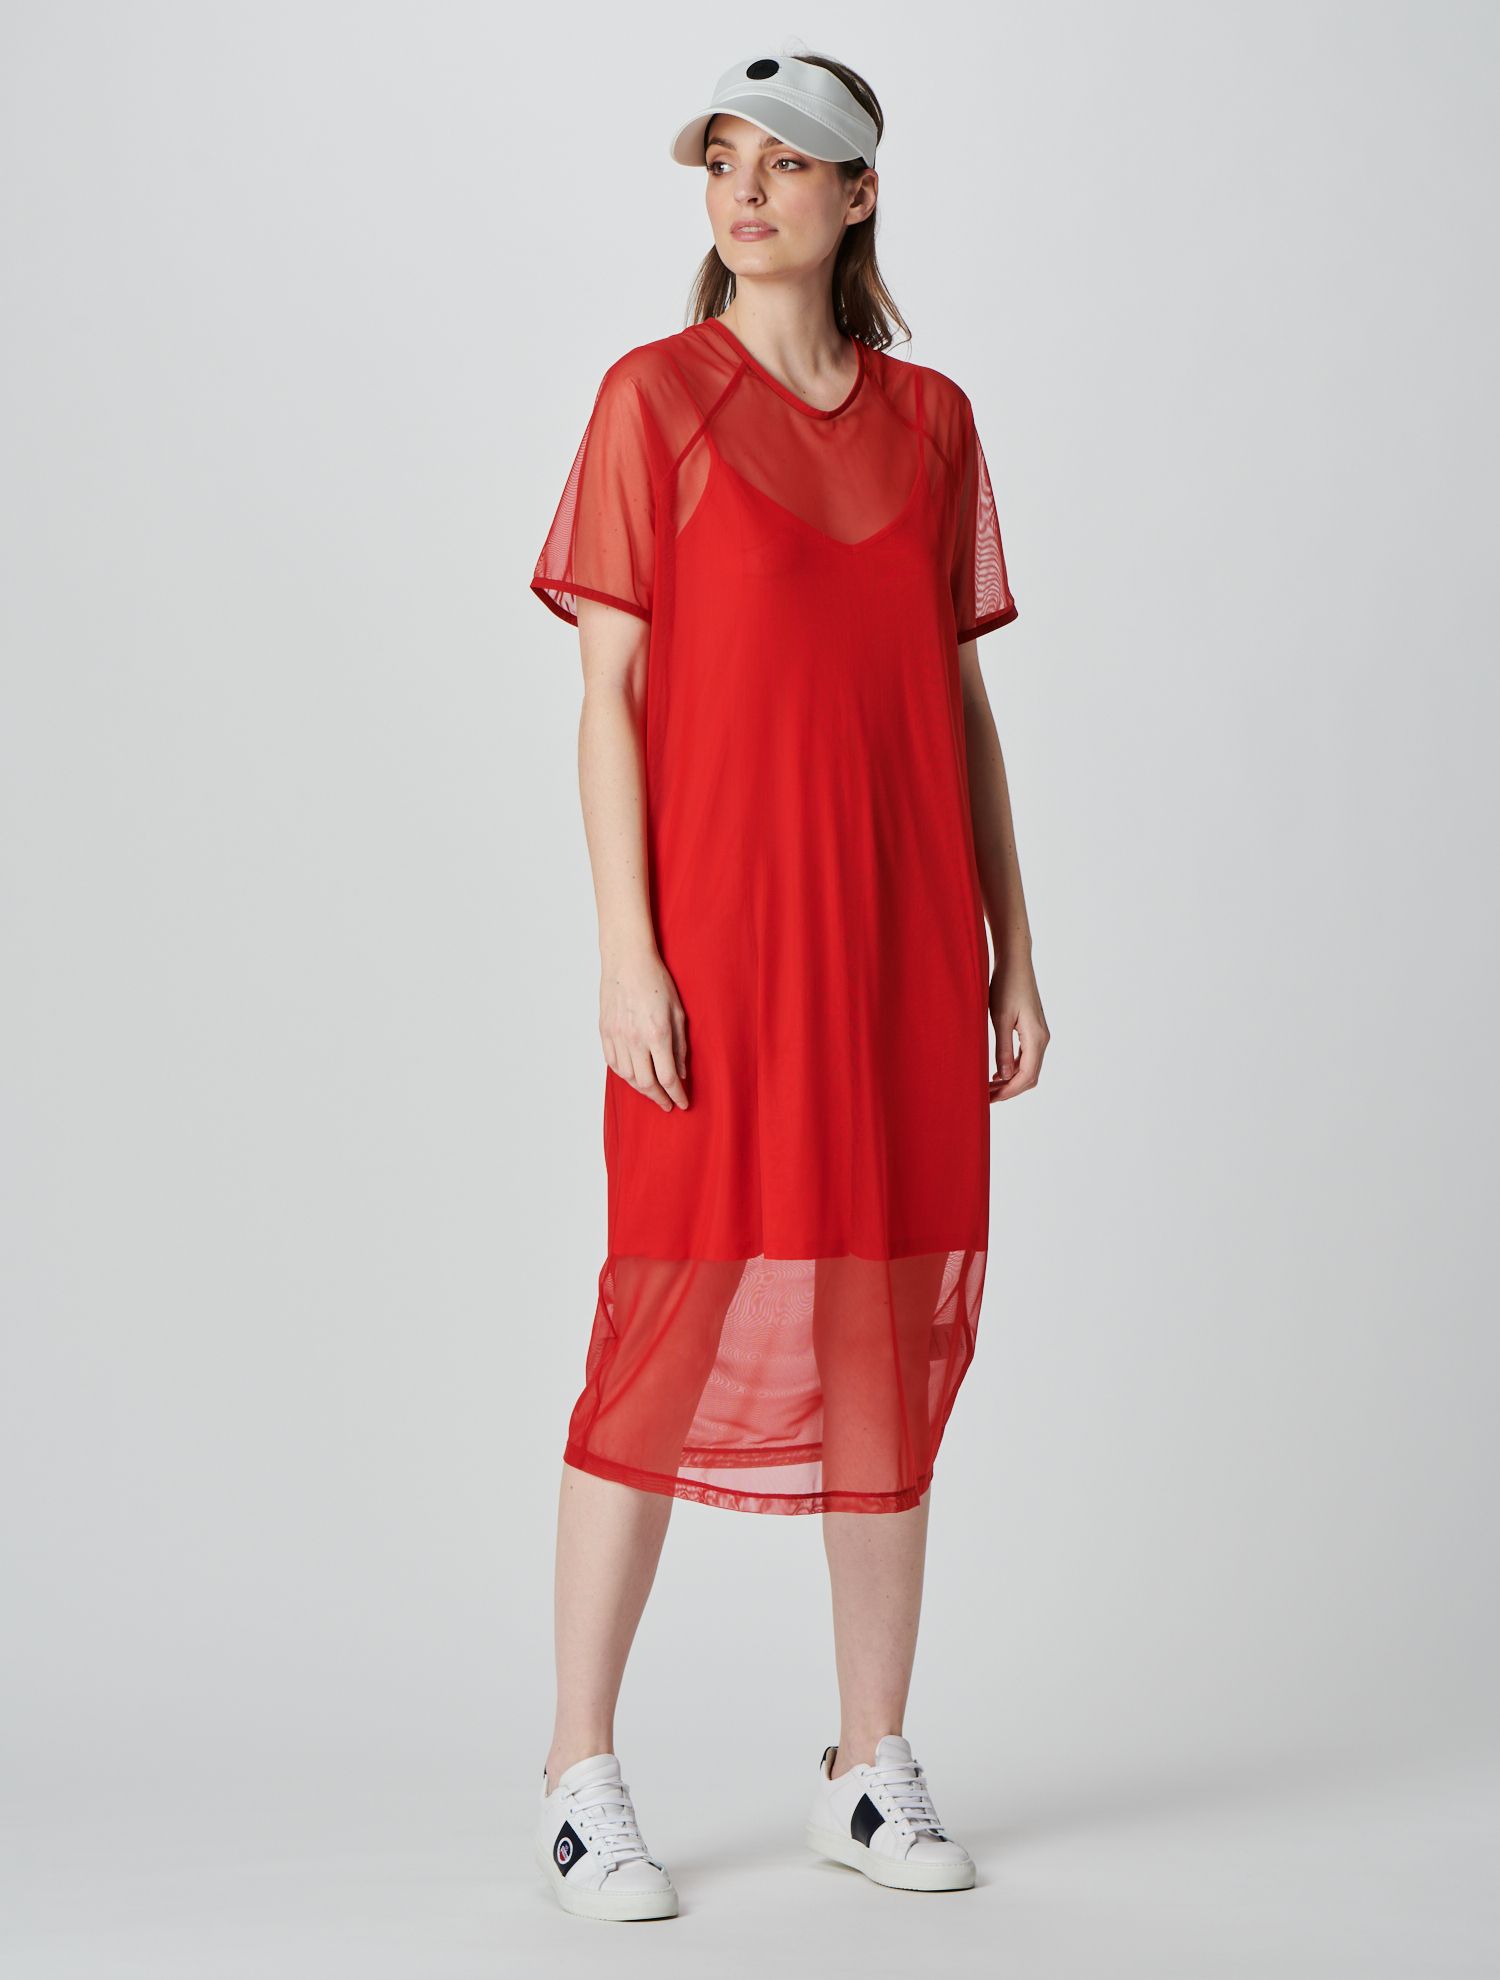 Fusalp - Suzie dress : Women dress in ultra light and breathable tulle